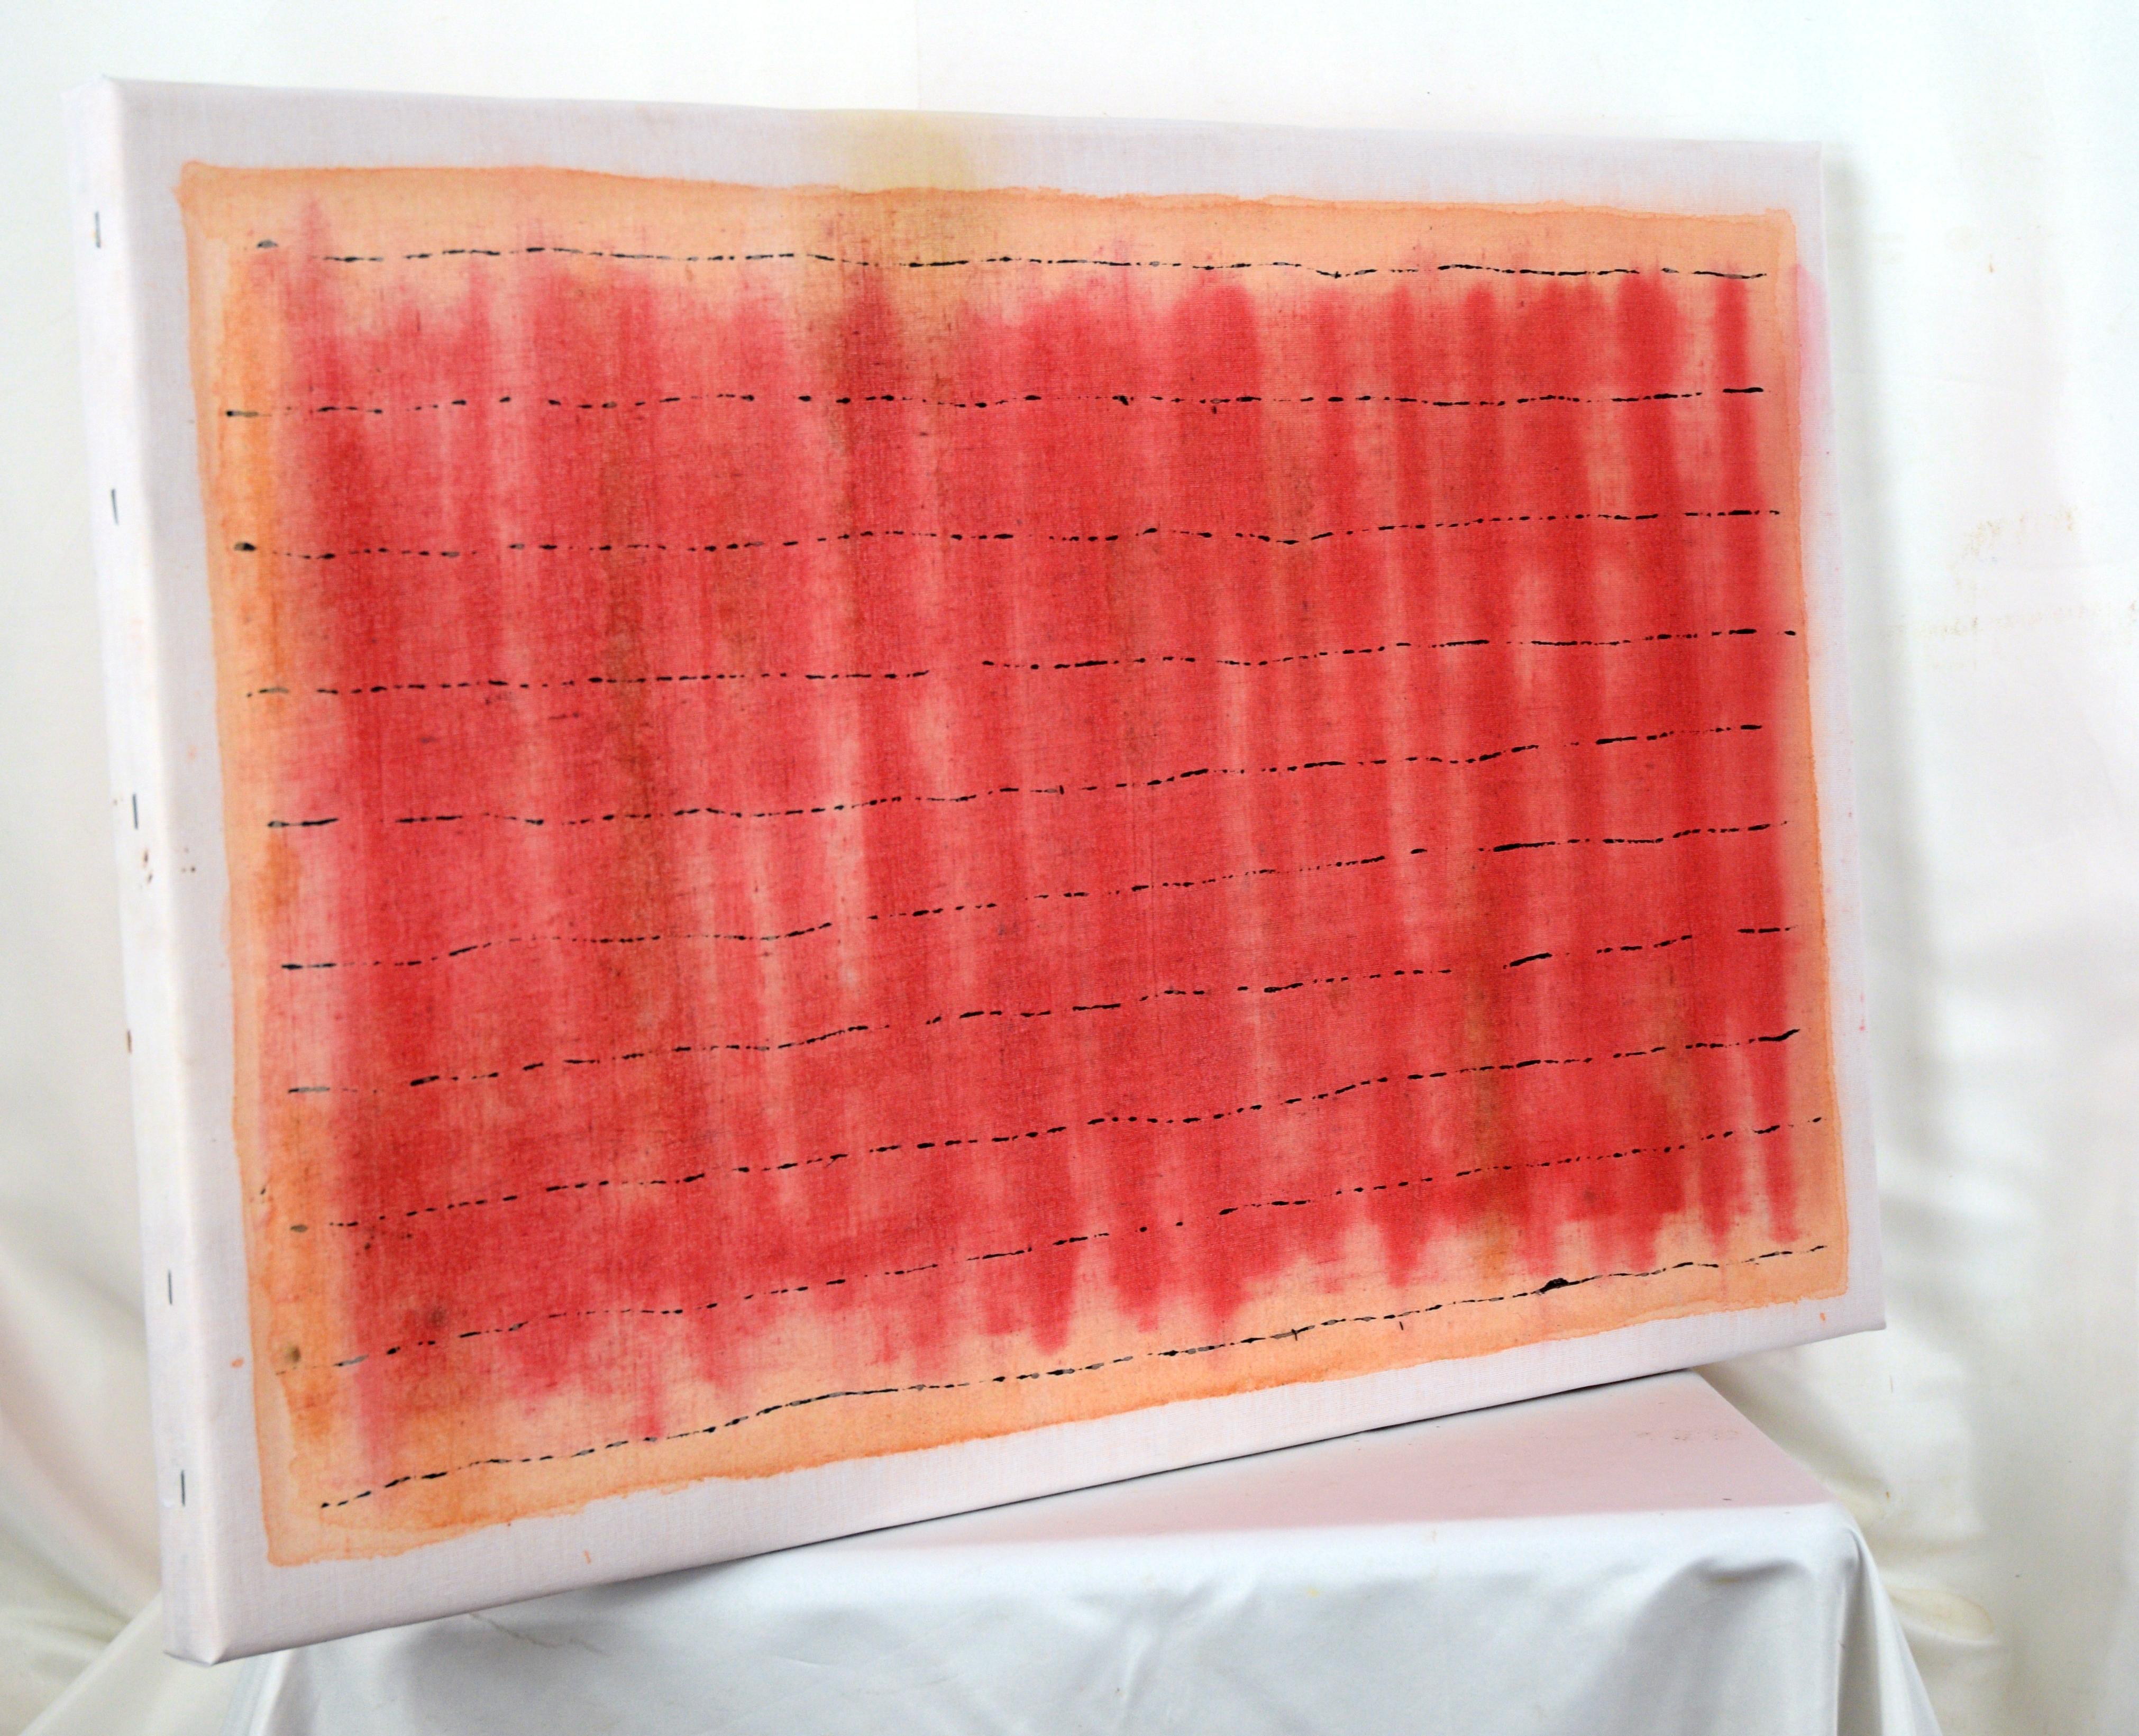 Black Lines Across a Red Field - Abstract Composition on Starched Linen 4